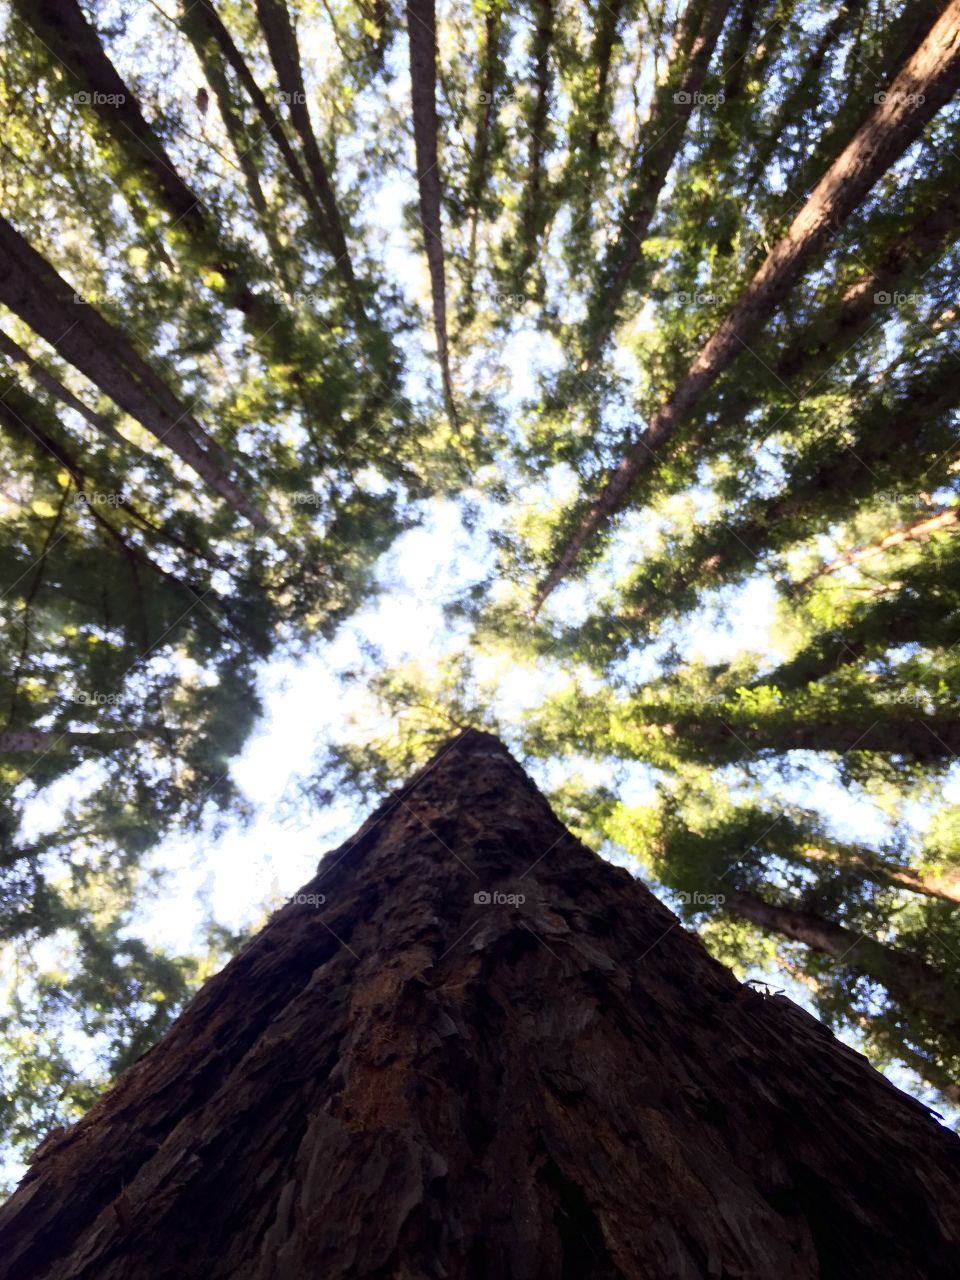 Looking up!. The trees in Miller road just outside San Francisco. In the "Star wars forest". 
